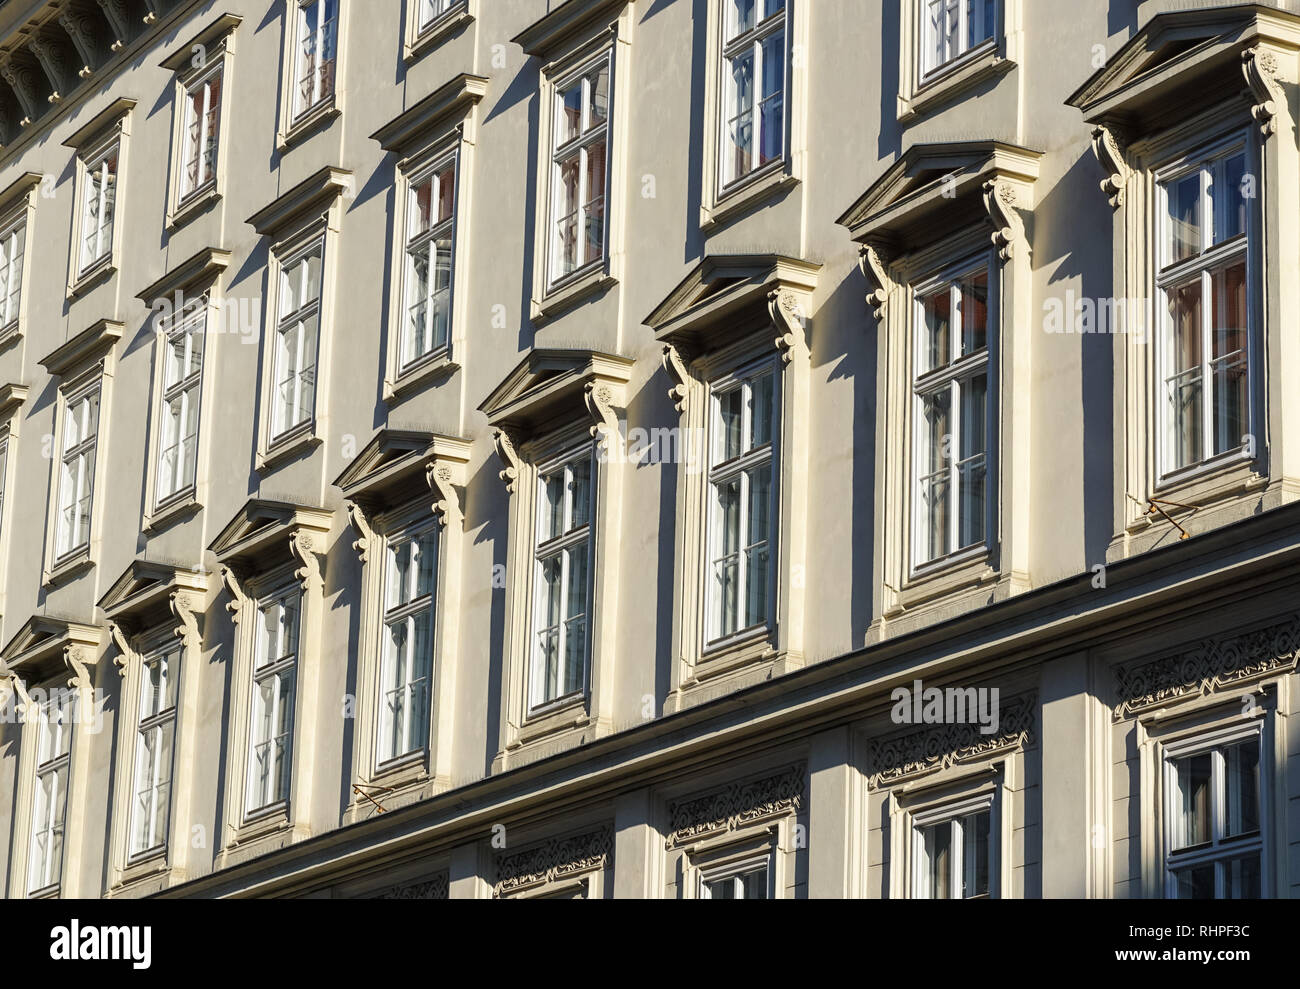 Architectural details on buildings in Vienna, Austria Stock Photo